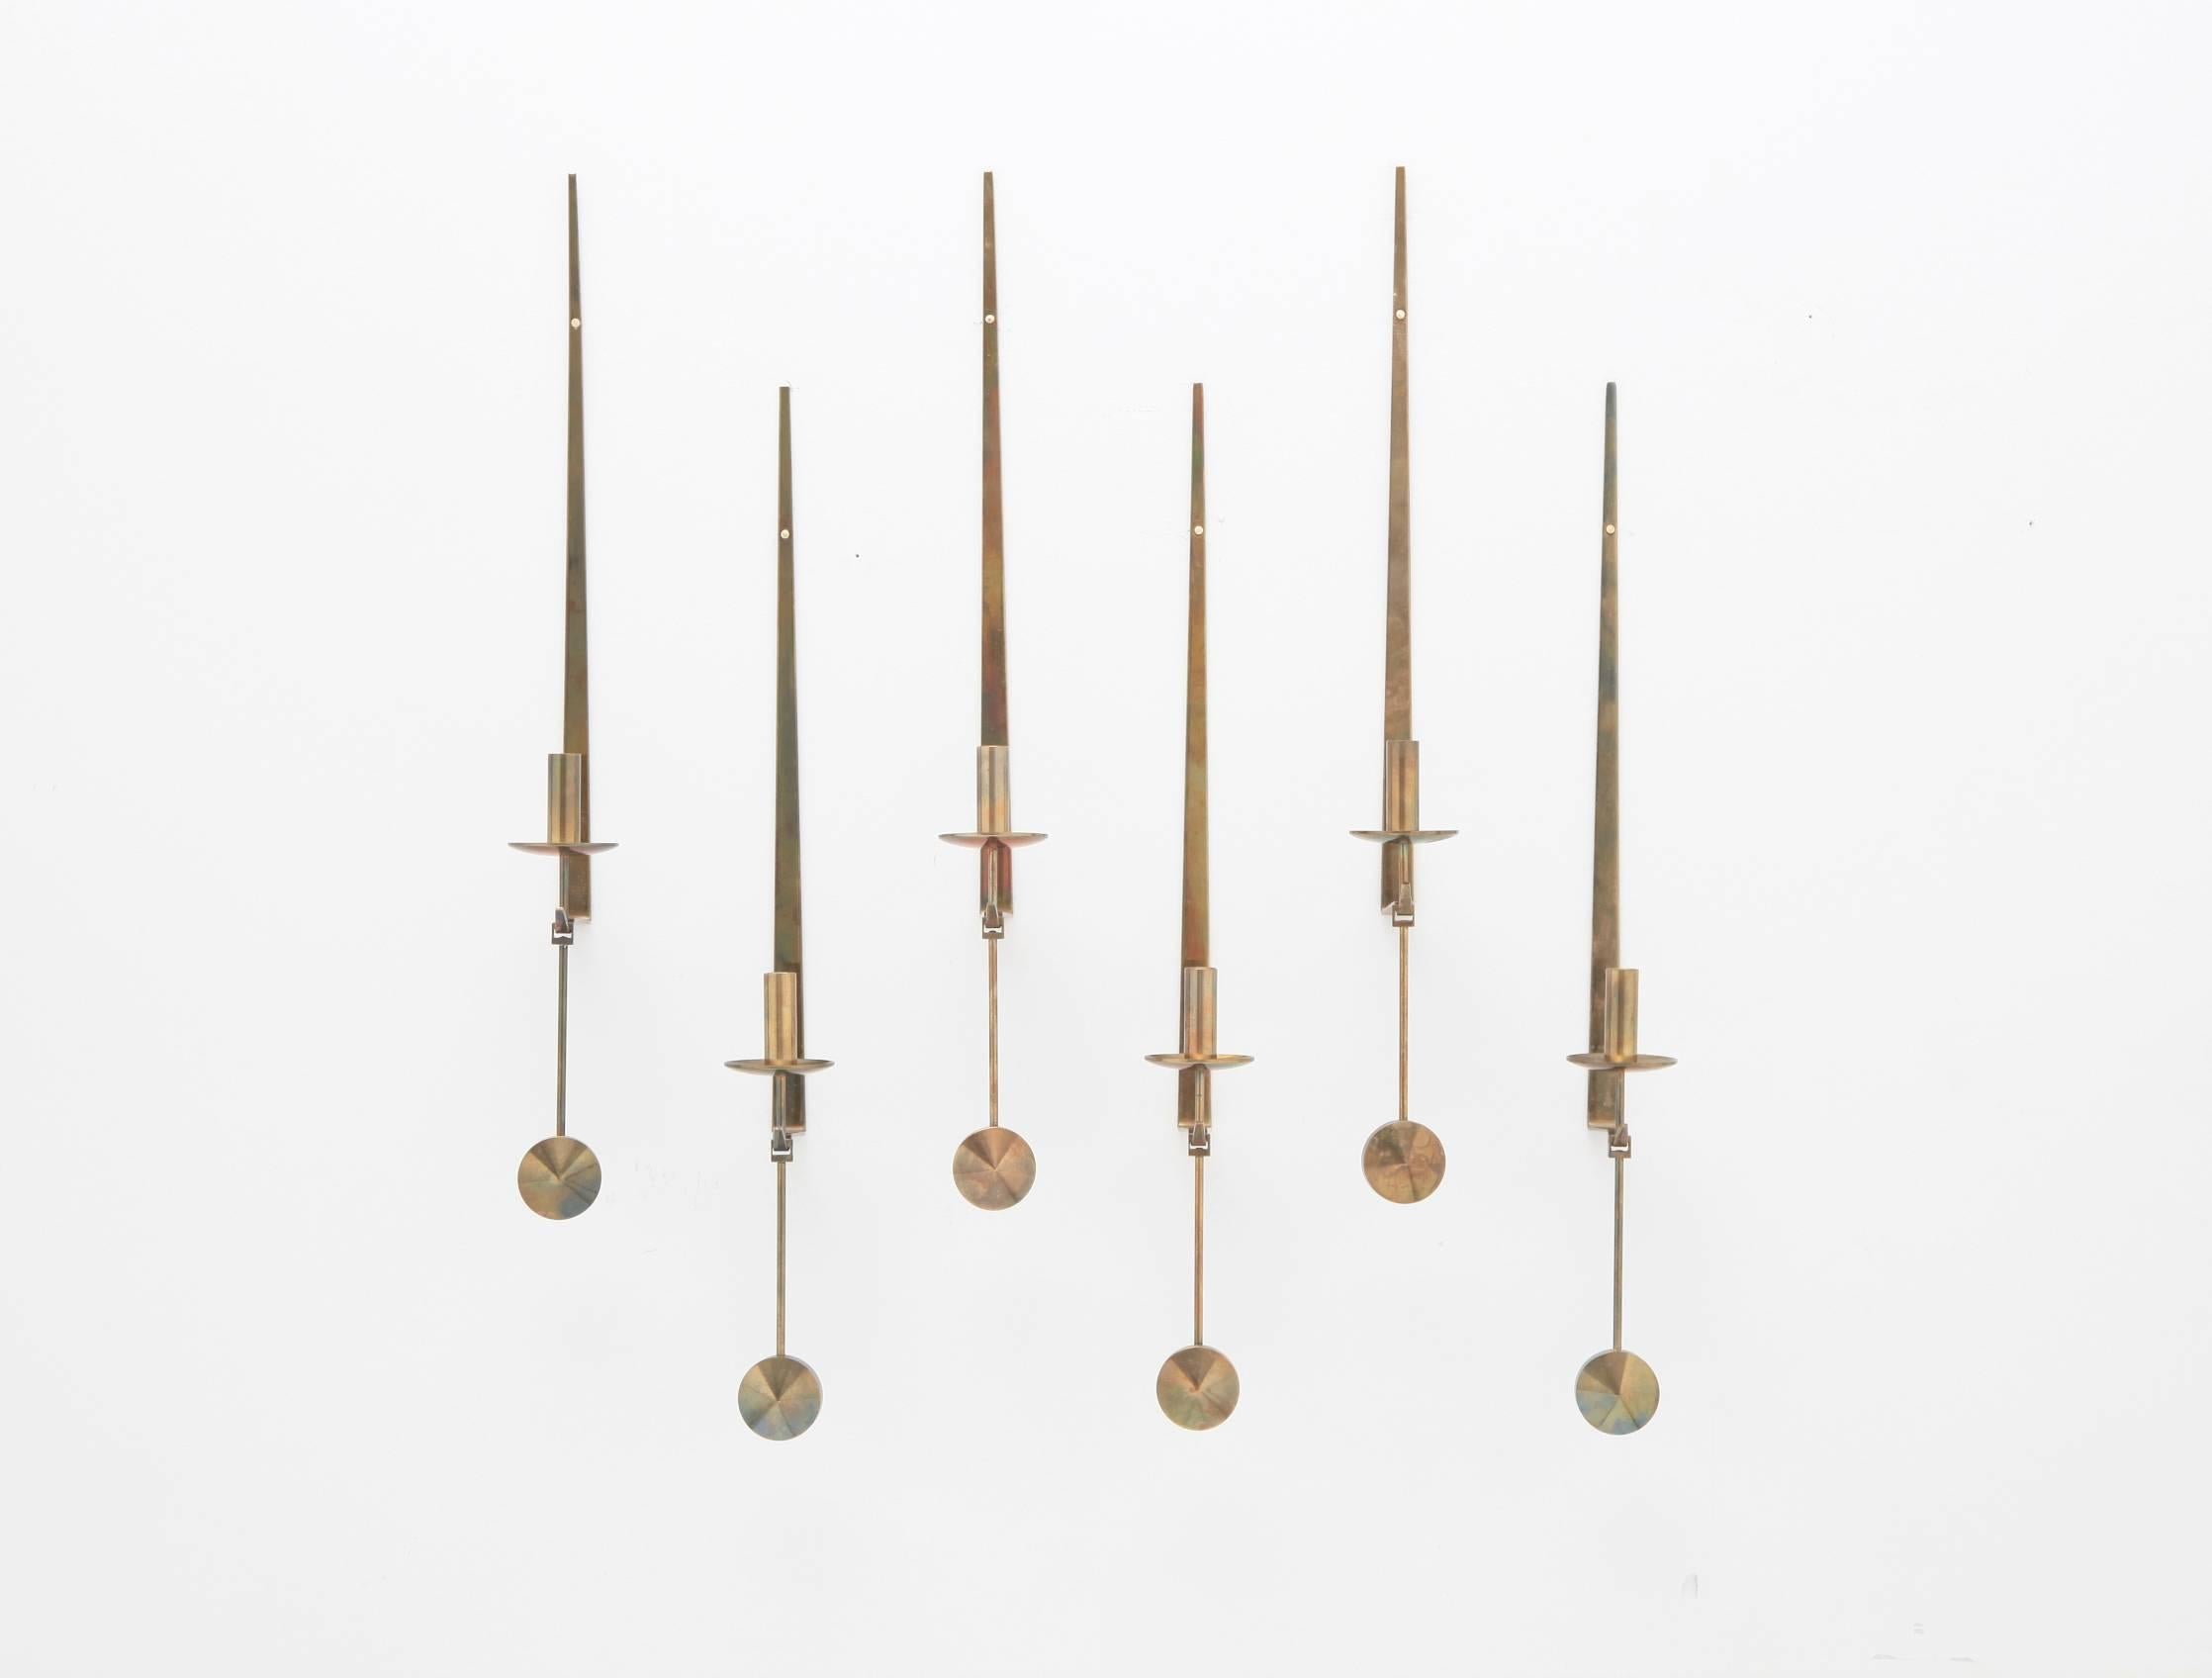 Pierre Forsell designed brass pendel wall appliques, collection of six. Rarer version with bobeche. Made by Skultuna, Sweden, circa 1965. In beautiful original patinated condition. Stamped with makers mark.

Measures: 2 W x 3.25 D x 19 H inches.